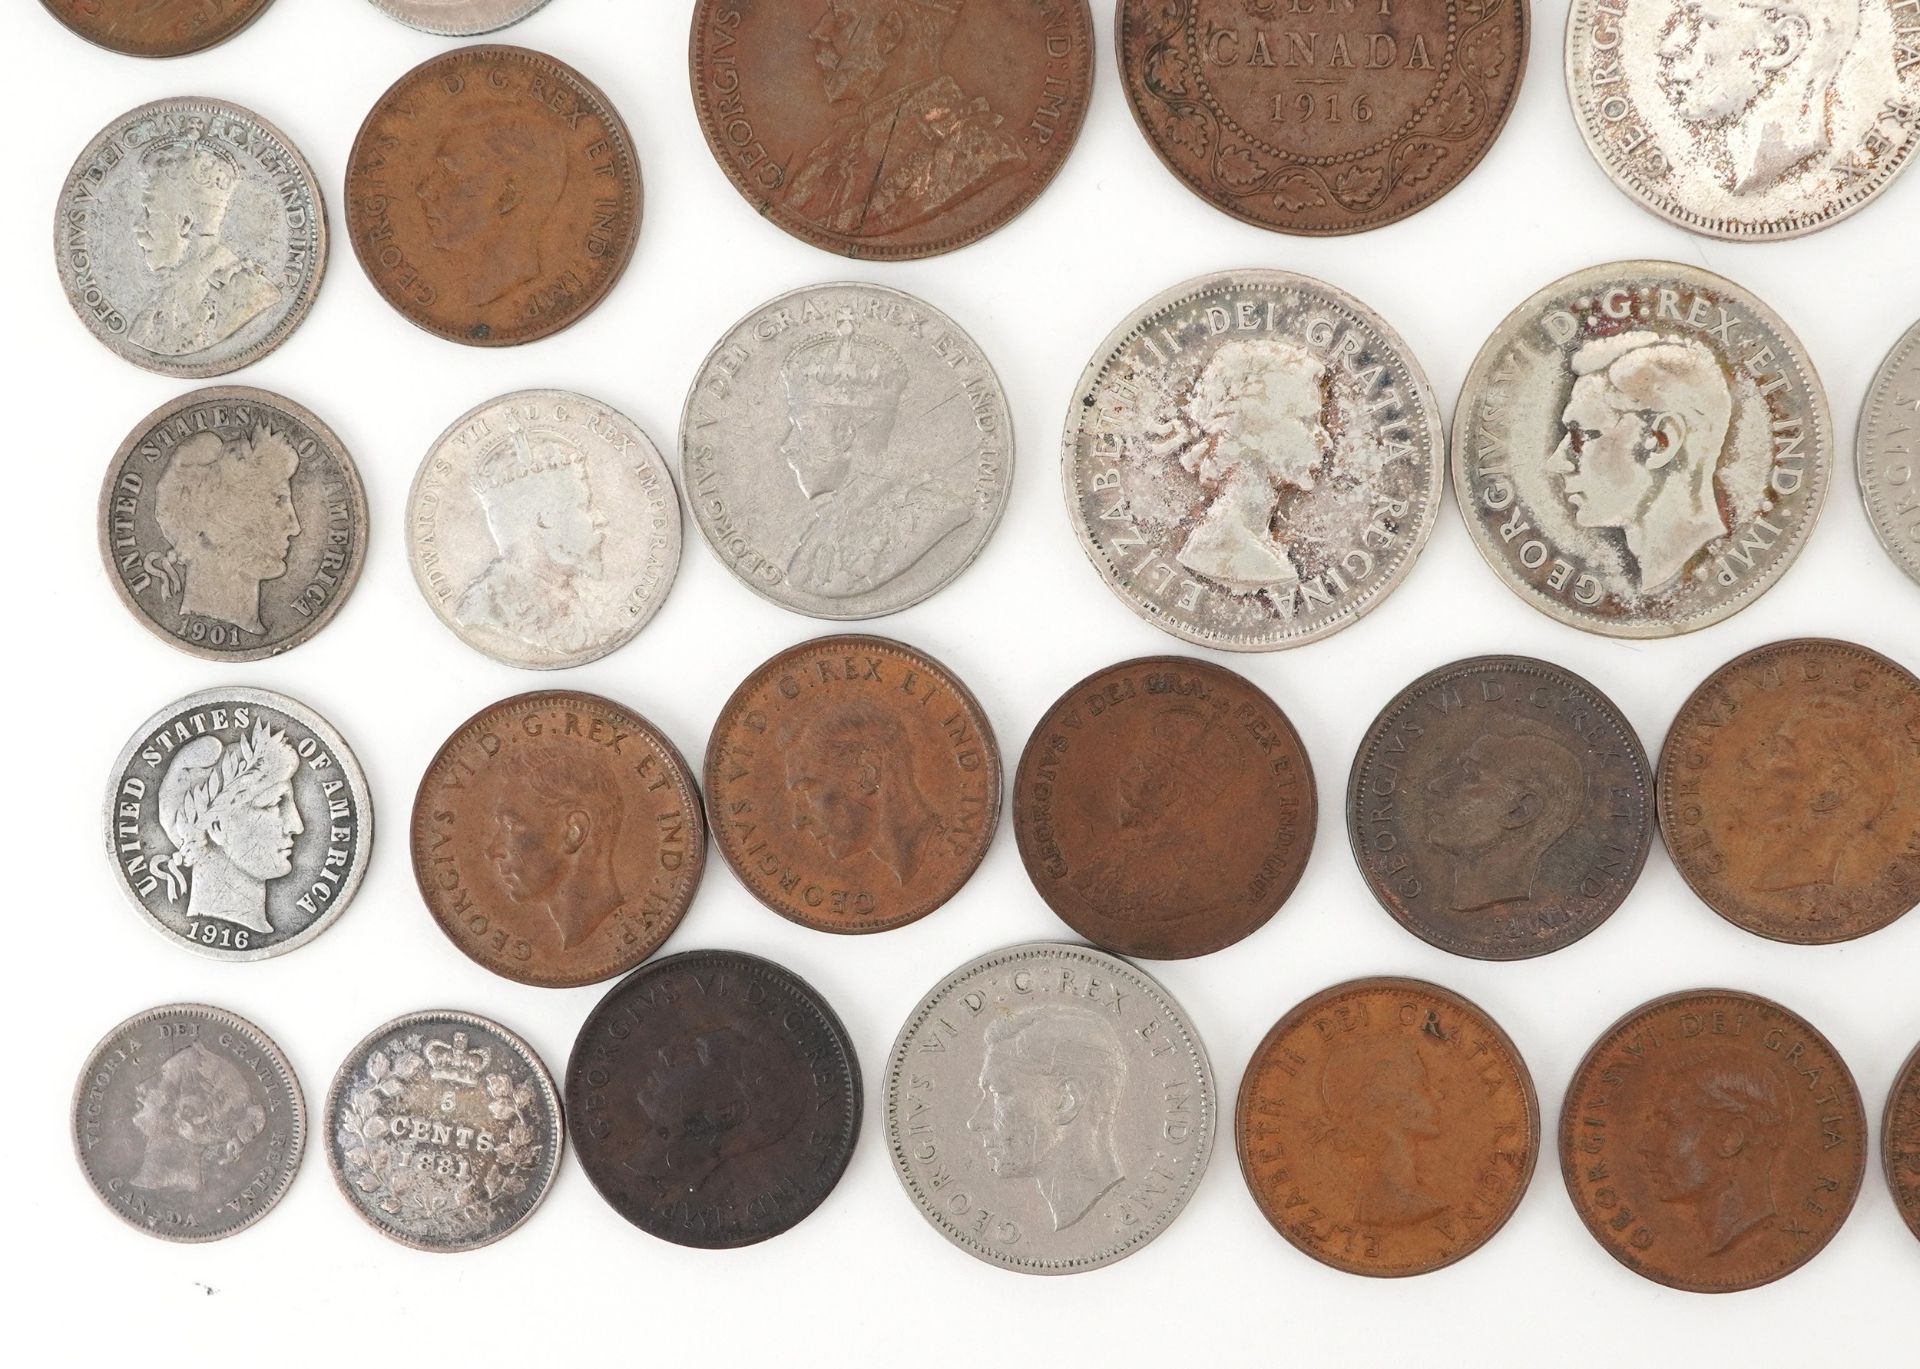 Early 19th century and later Canadian coinage and tokens including Nova Scotia one penny tokens, - Image 18 of 20